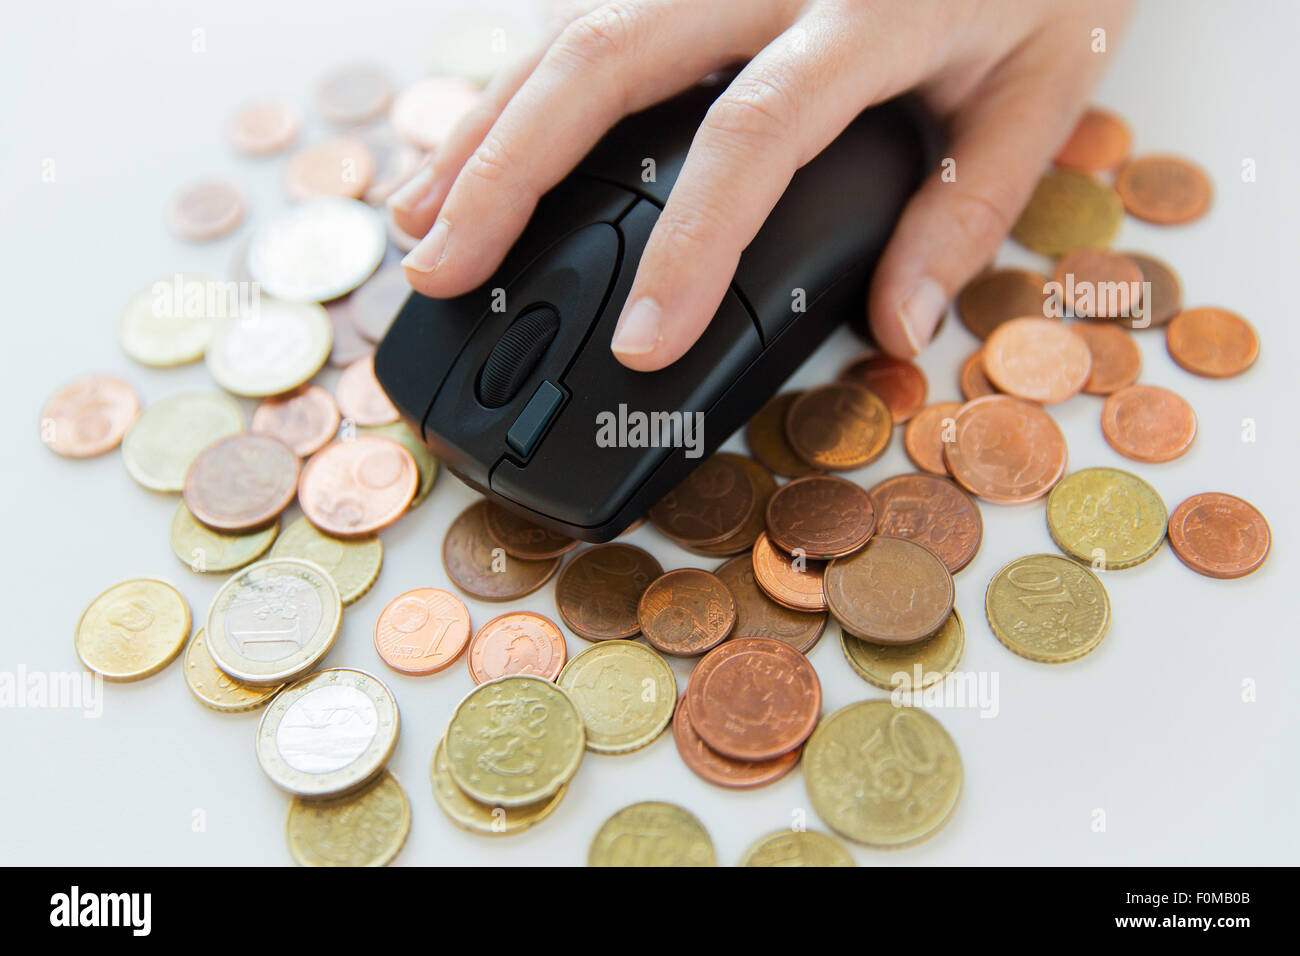 close up of hand with computer mouse on money Stock Photo